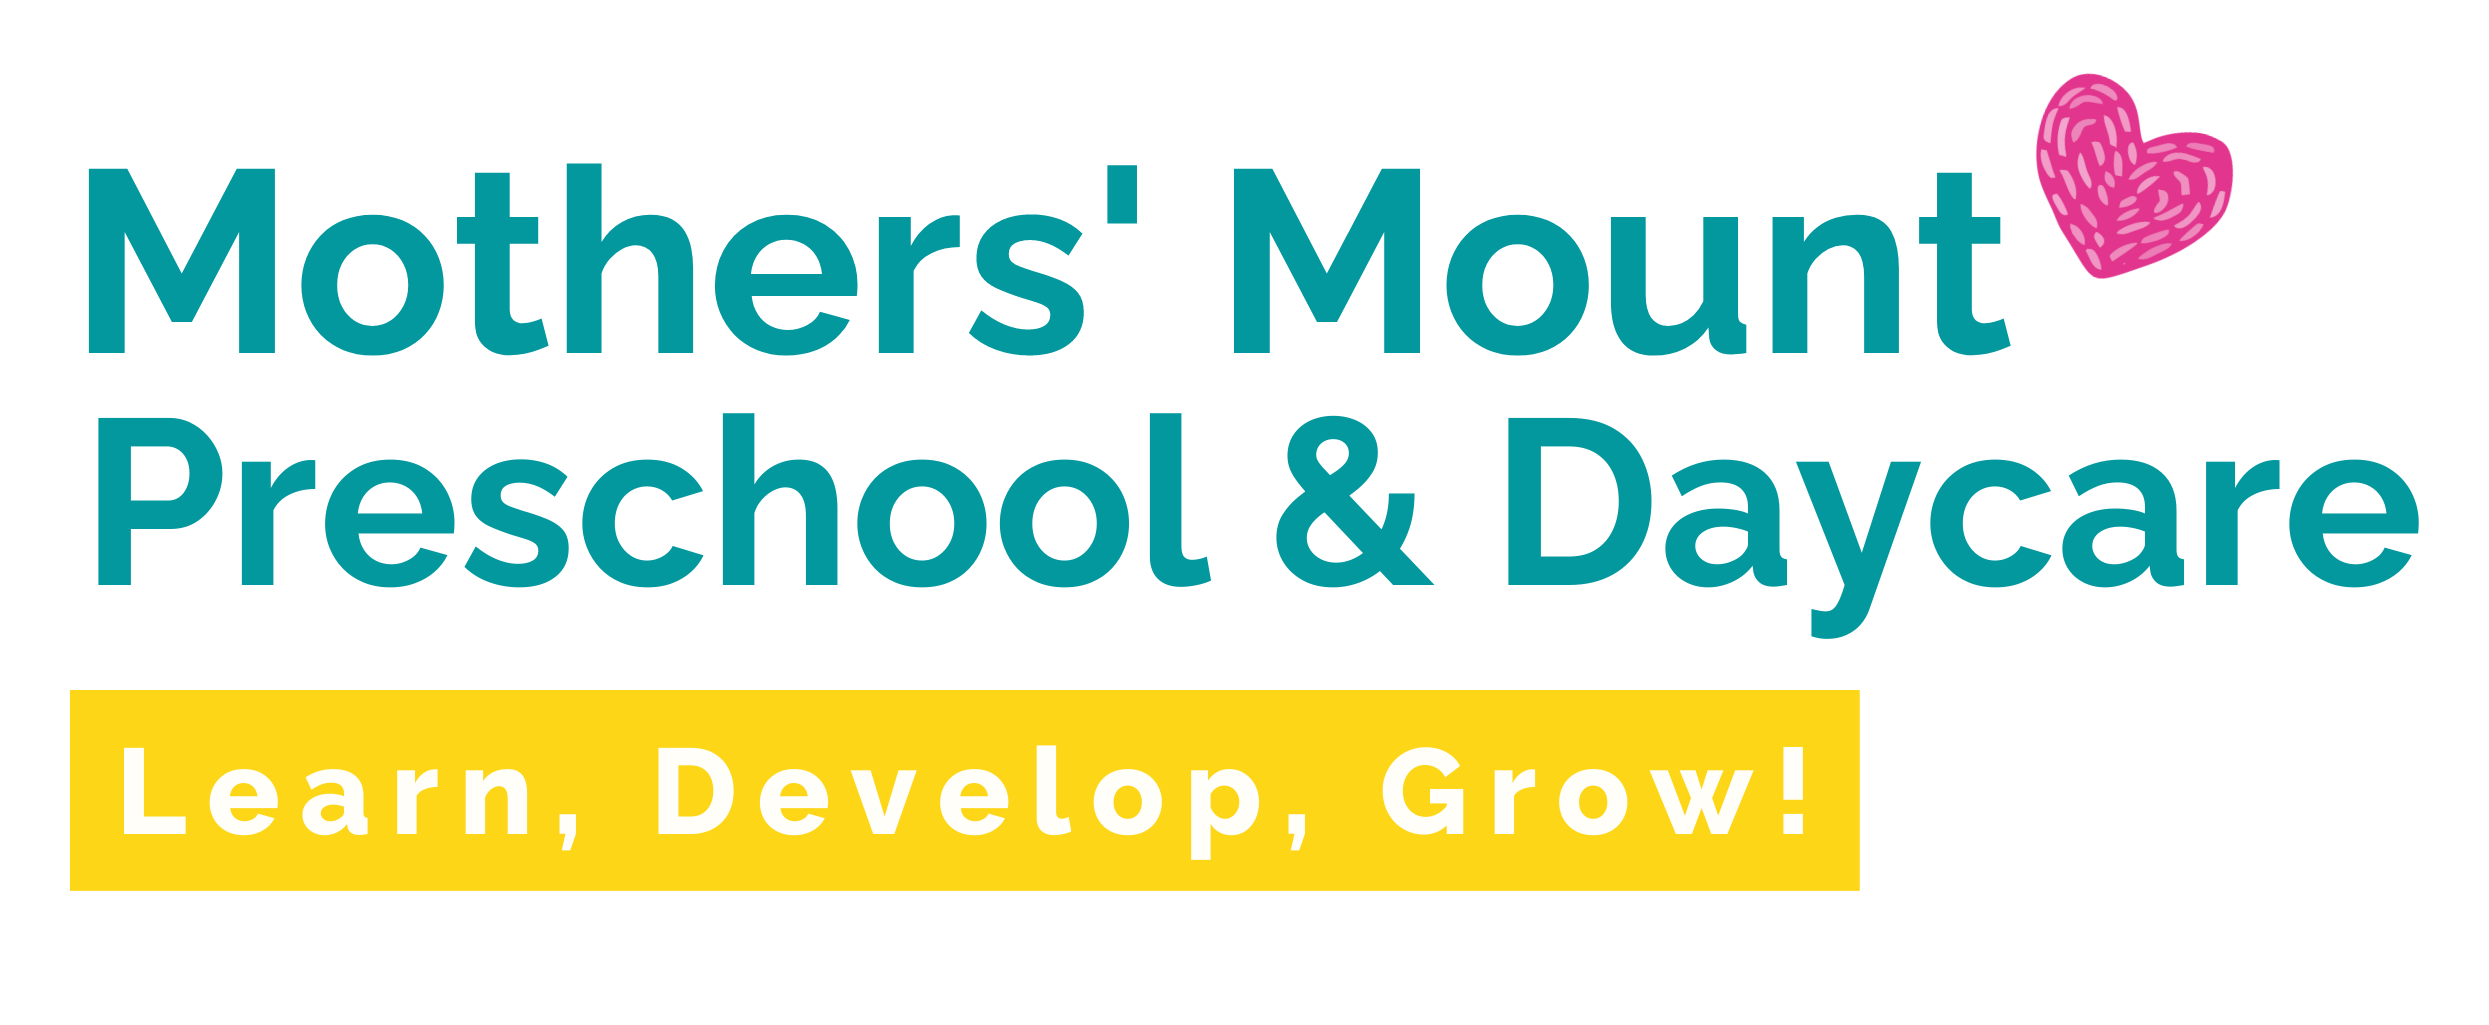 Mothers' Mount Preschool and Daycare, Noida